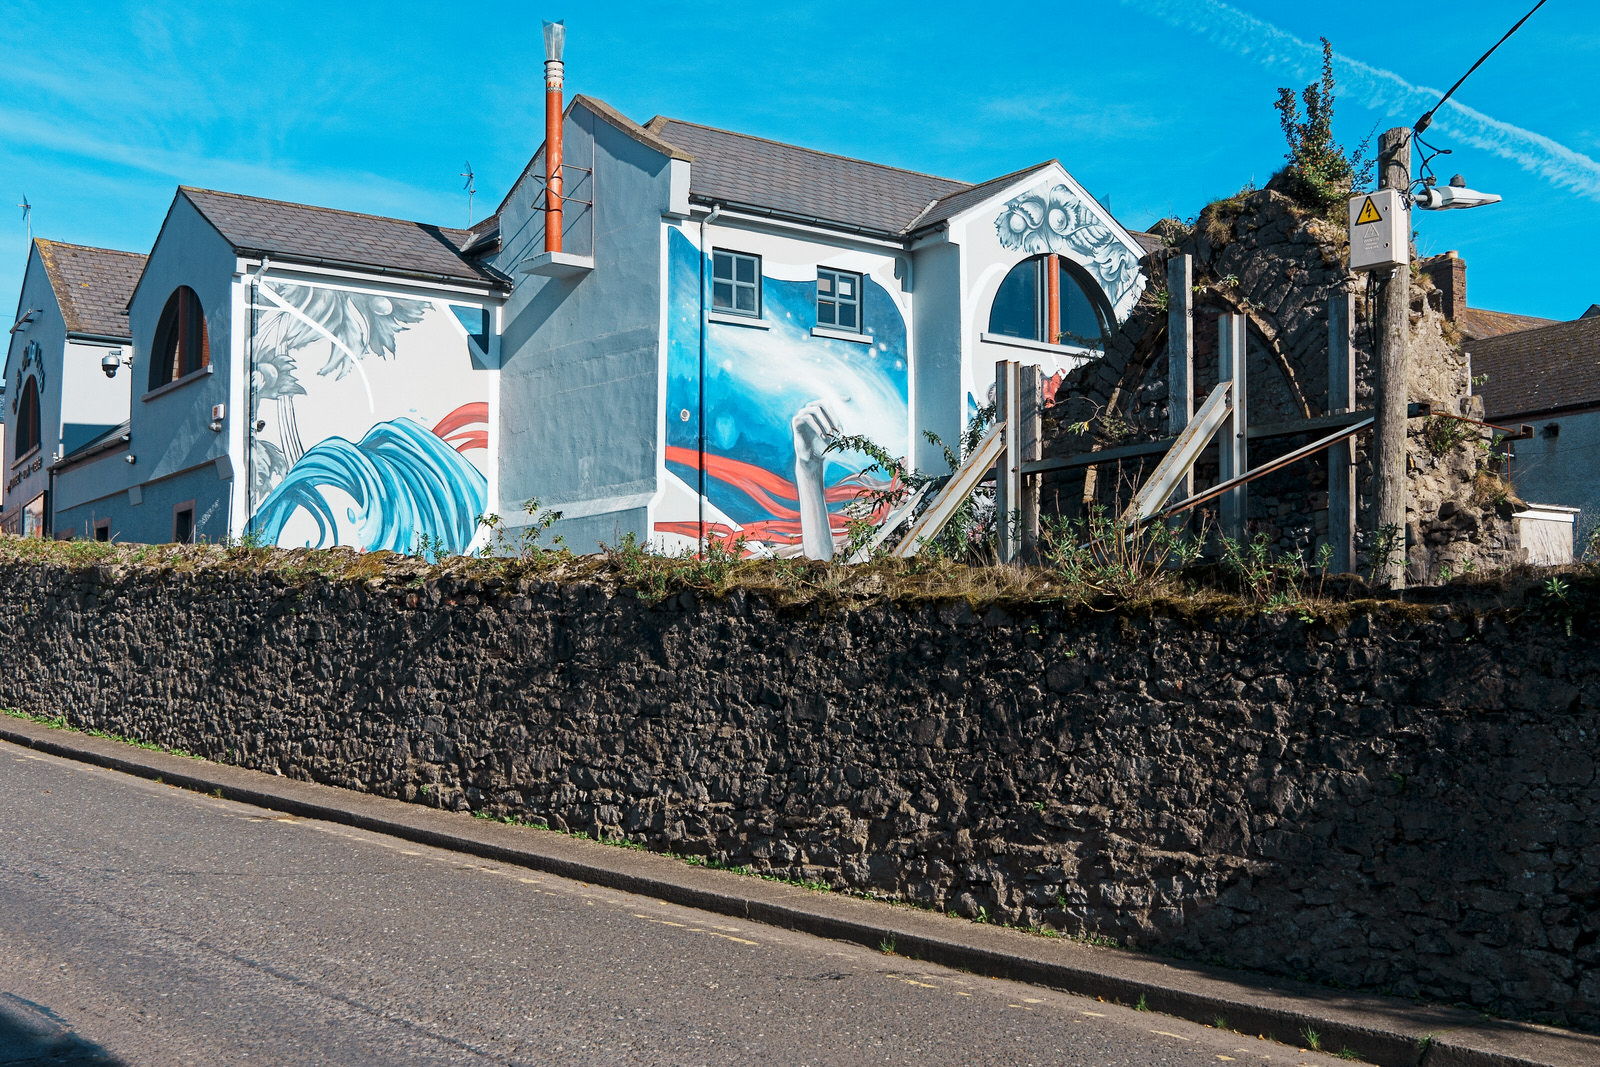 BOANN IS AN AMAZING MURAL BY LULA GOCE [BUT WHAT ABOUT THE CHEMTRAILS?]
001